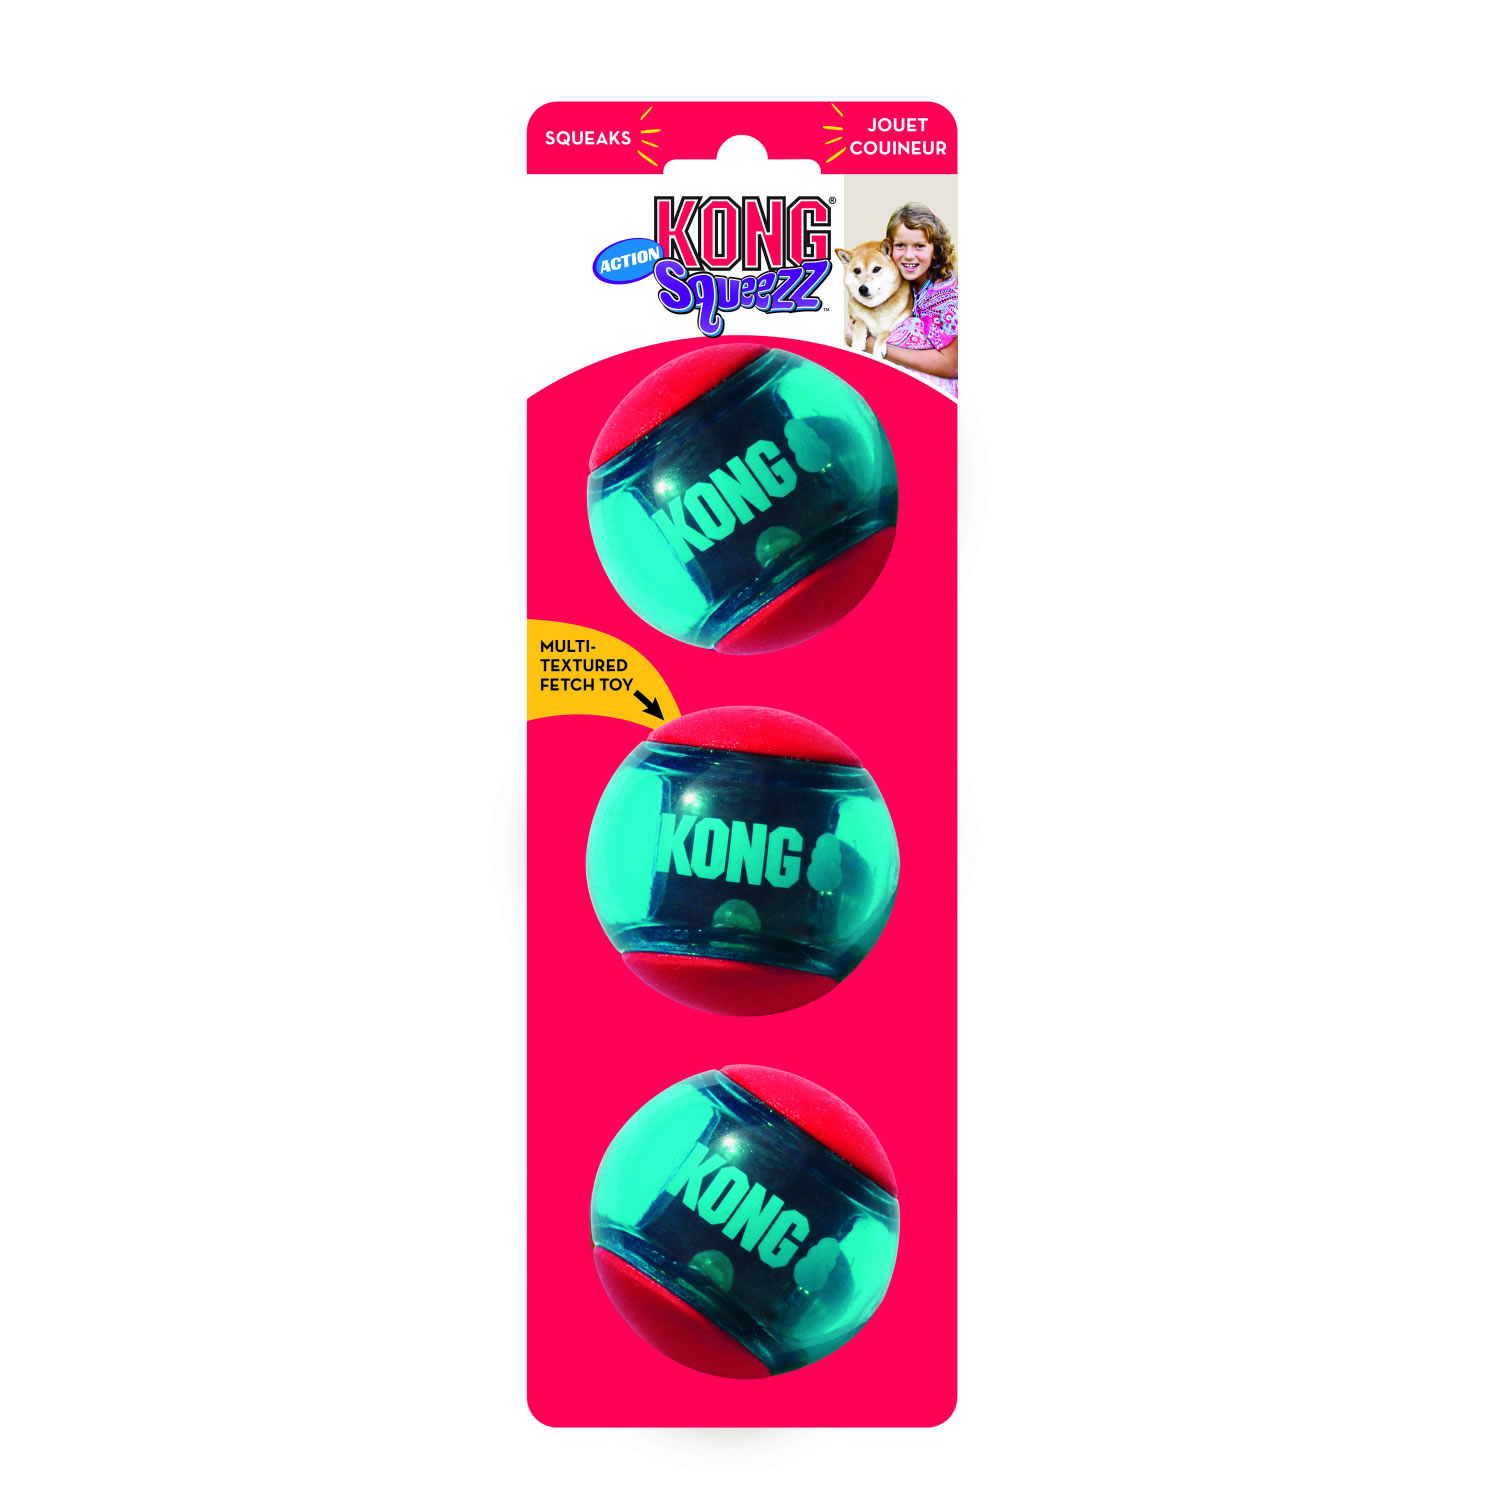 KONG SQUEEZZ ACTION BALL  SMALL  RED 3 PACK